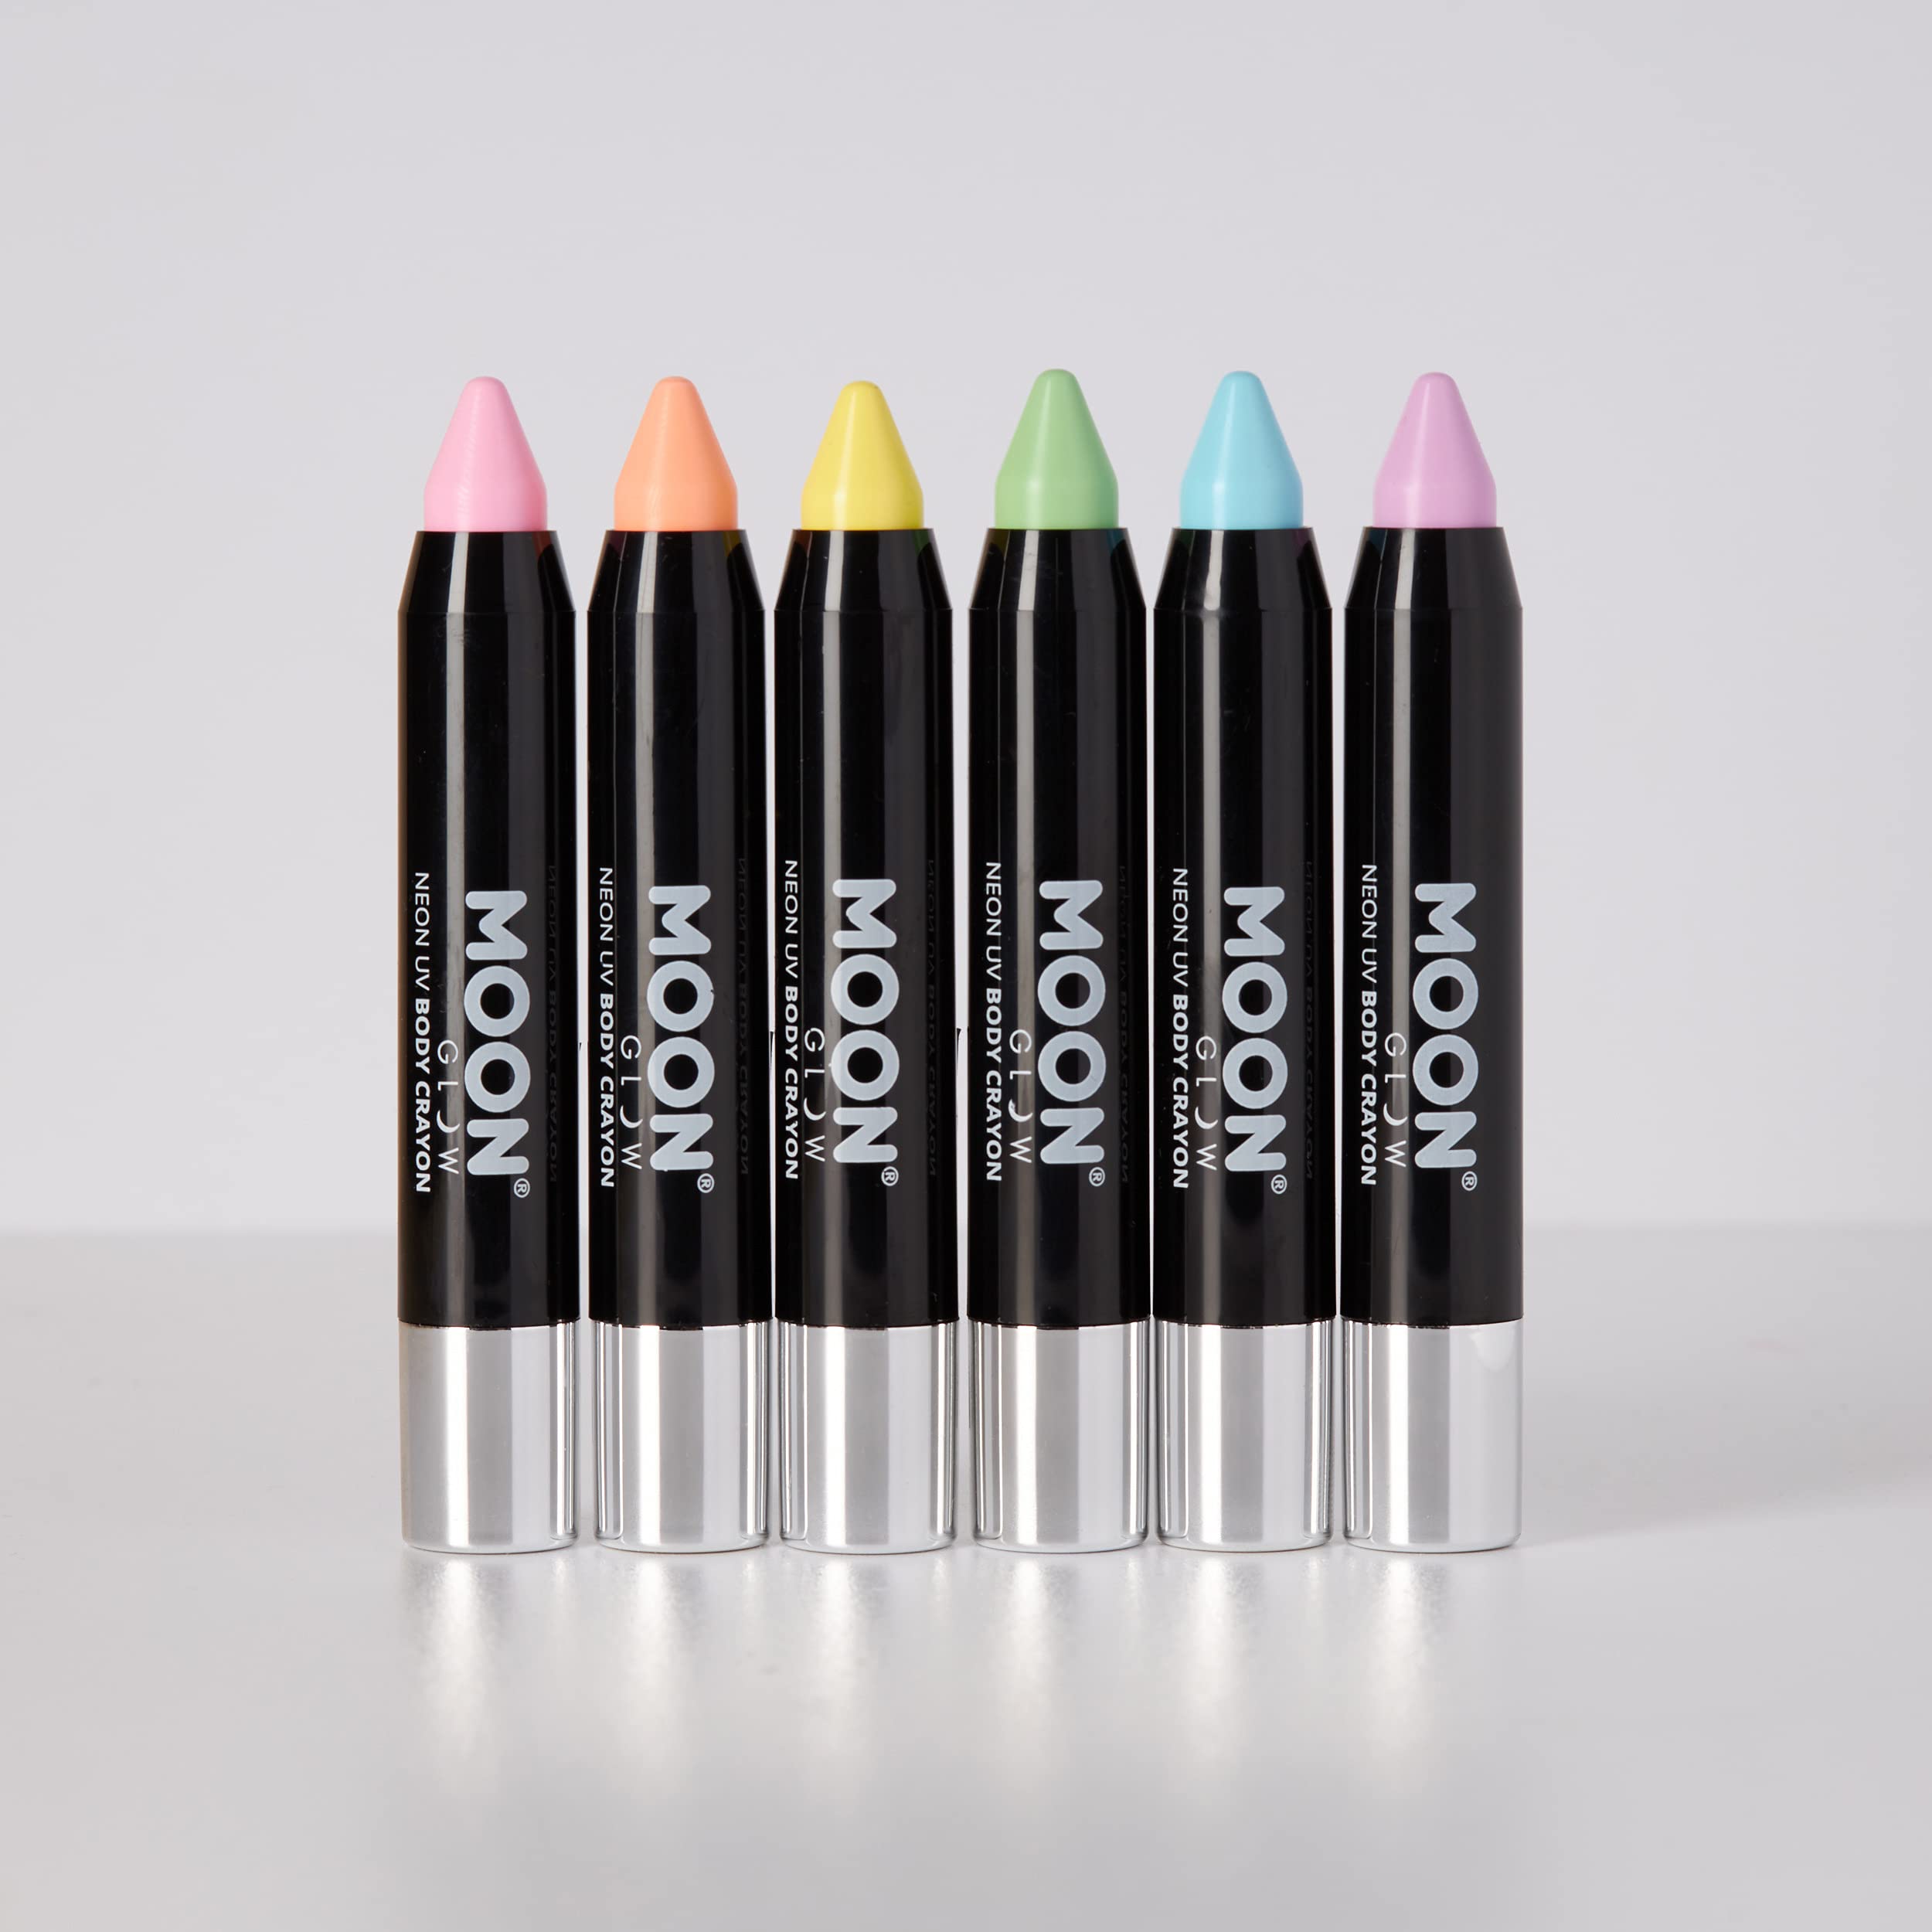 Moon Glow - Blacklight Neon Face Paint Stick/Body Crayon makeup for the Face & Body - Pastel set of 6 colours - Glows brightly under blacklights